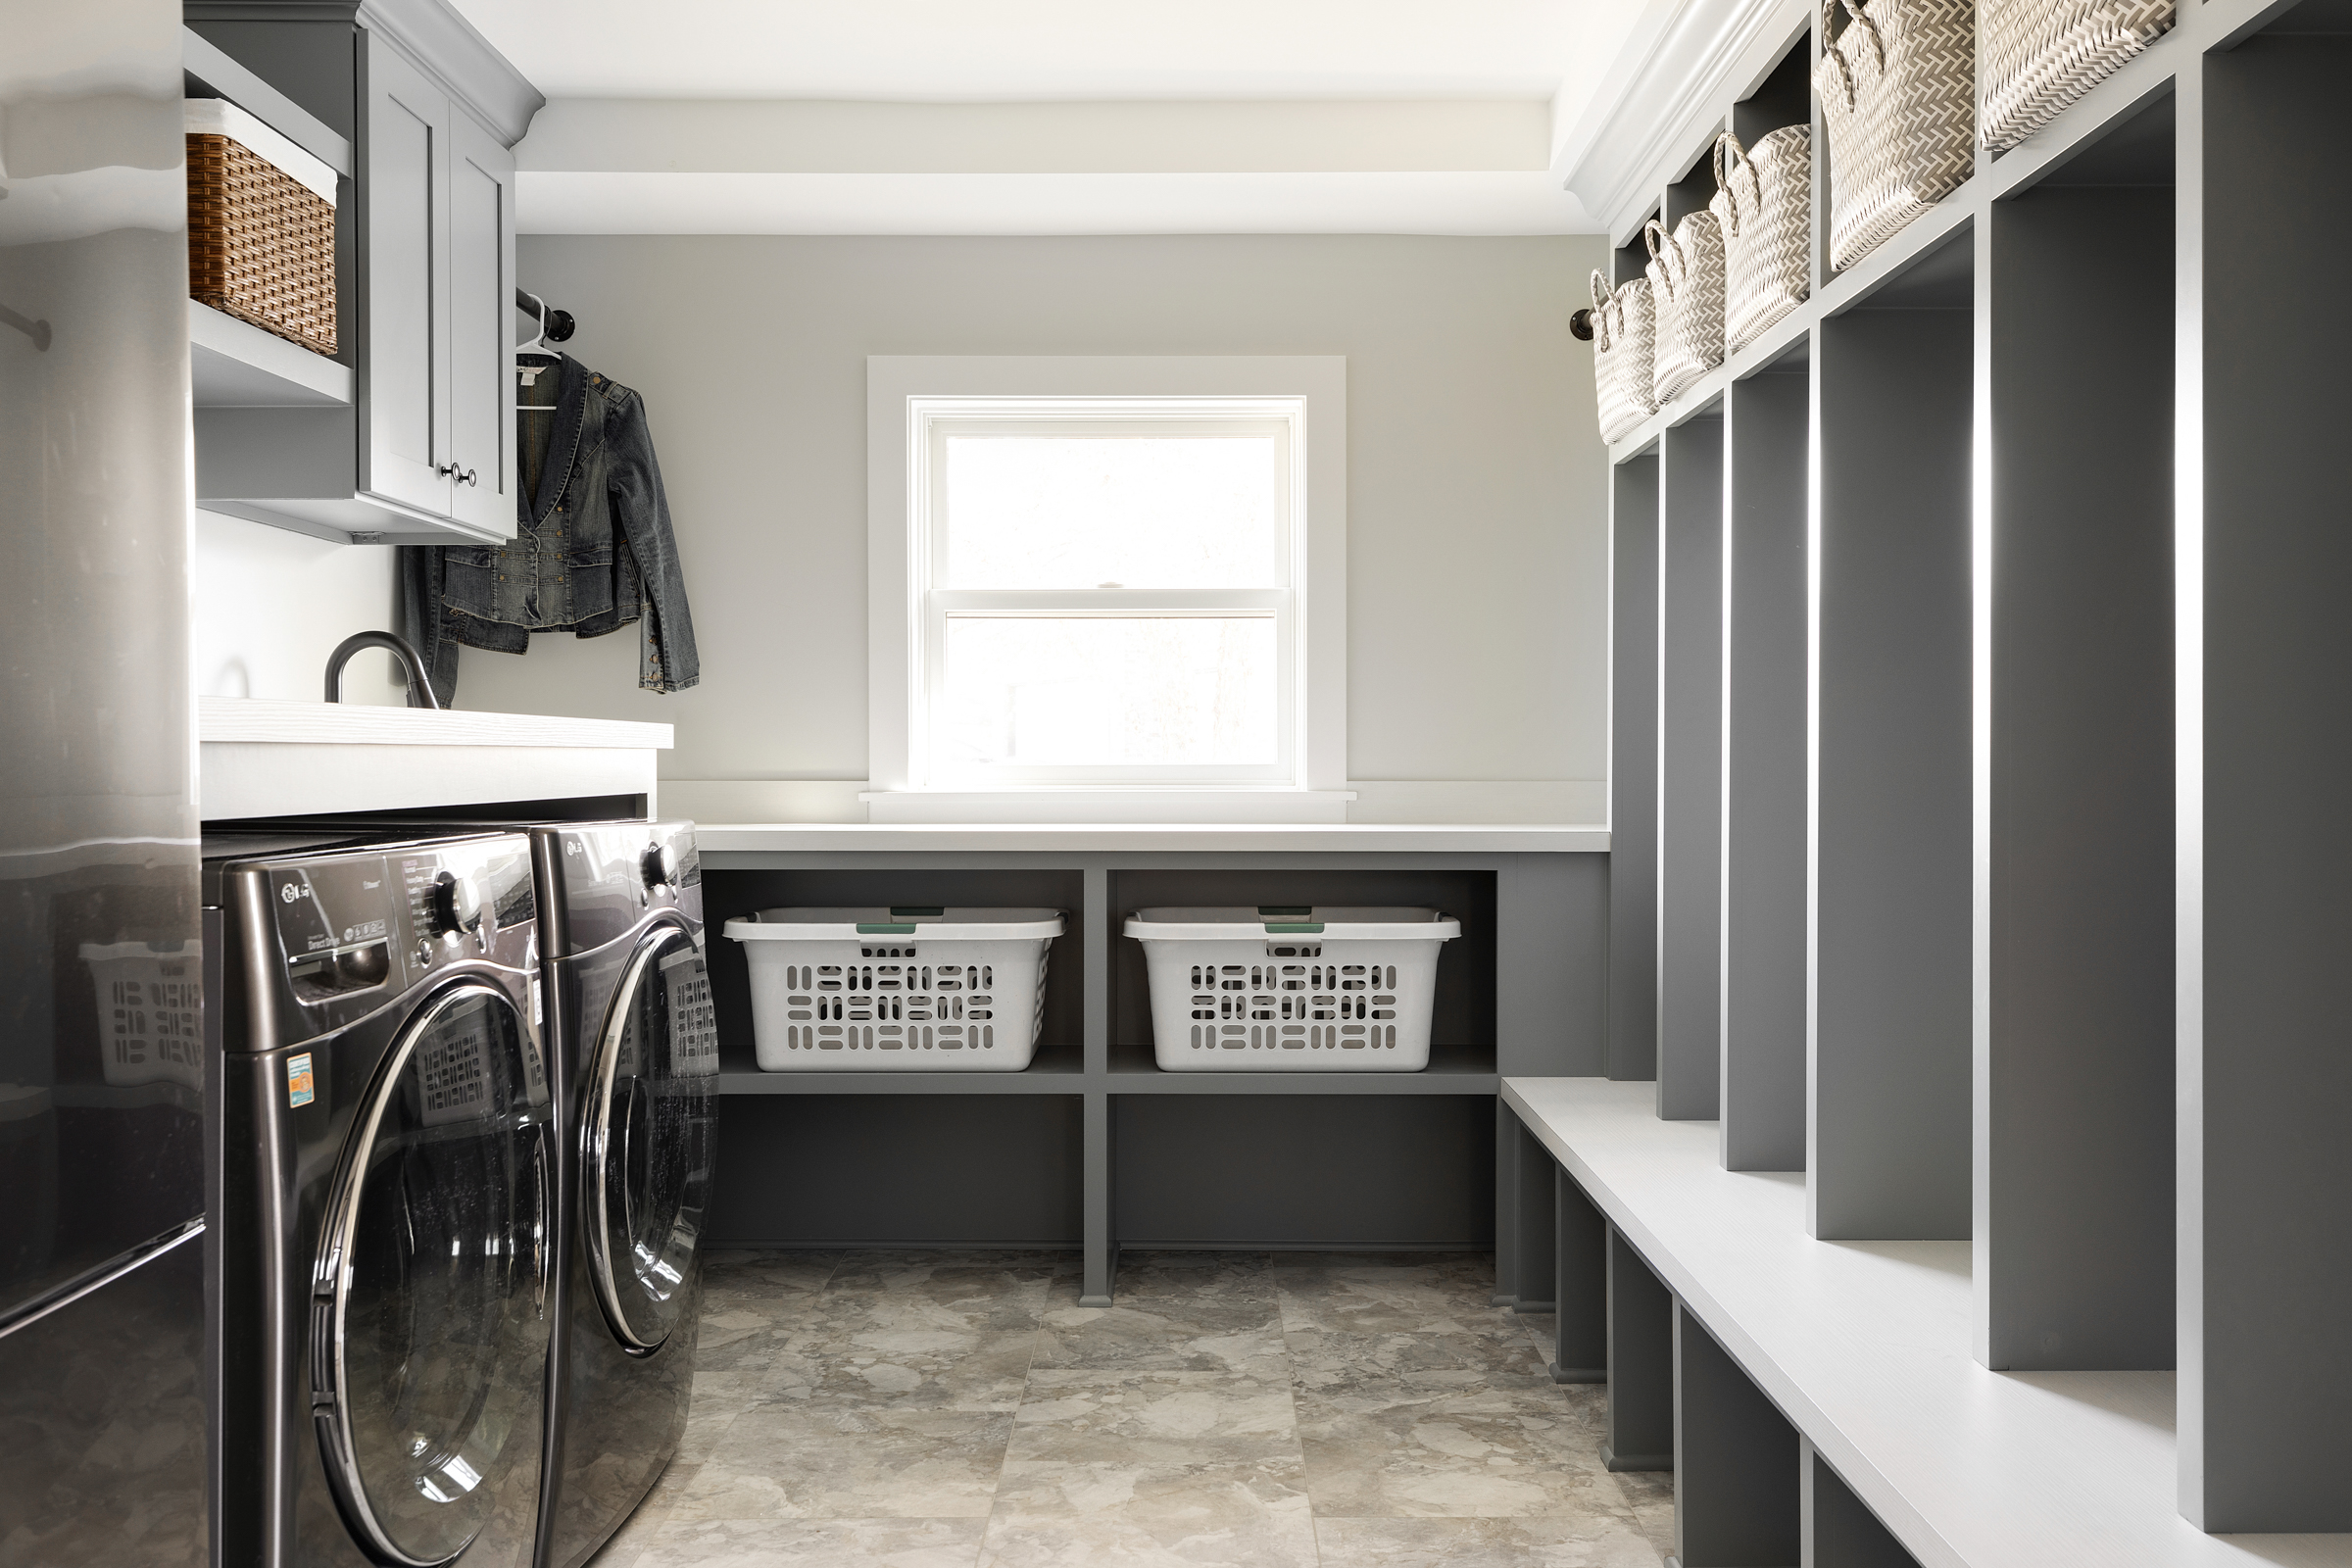 Maximize space in the laundry room